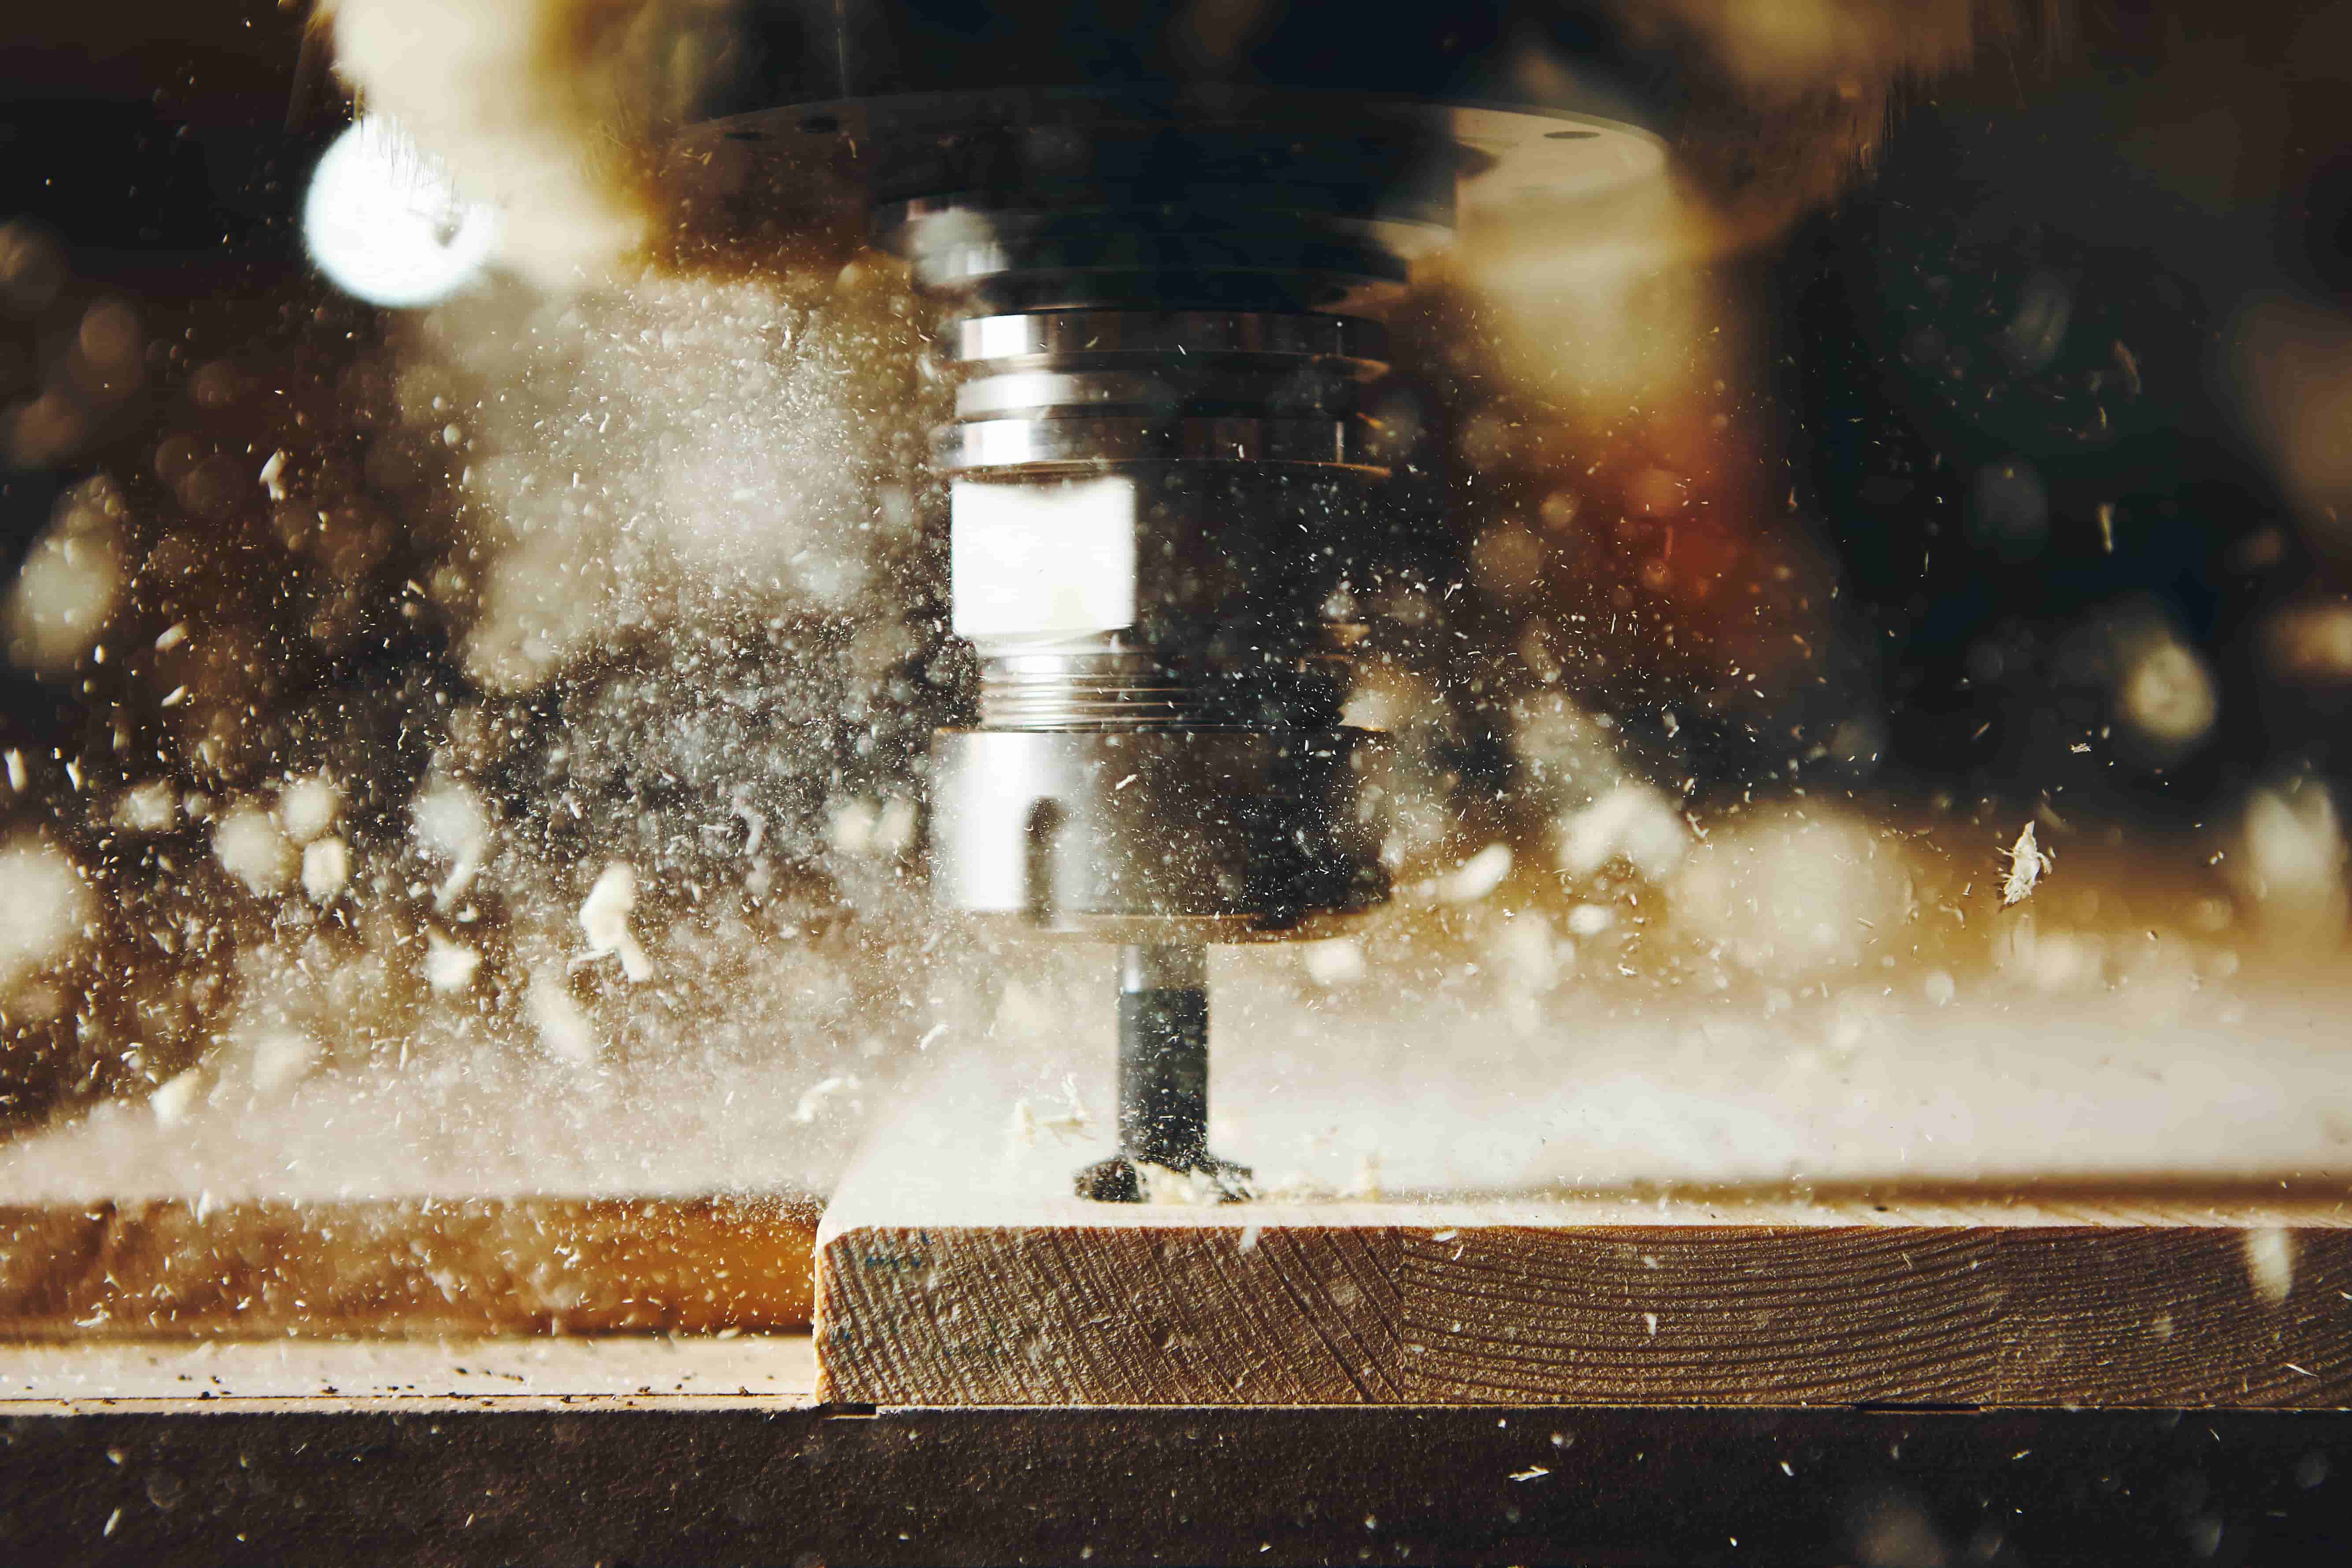 Wood machining is one of our specialties.